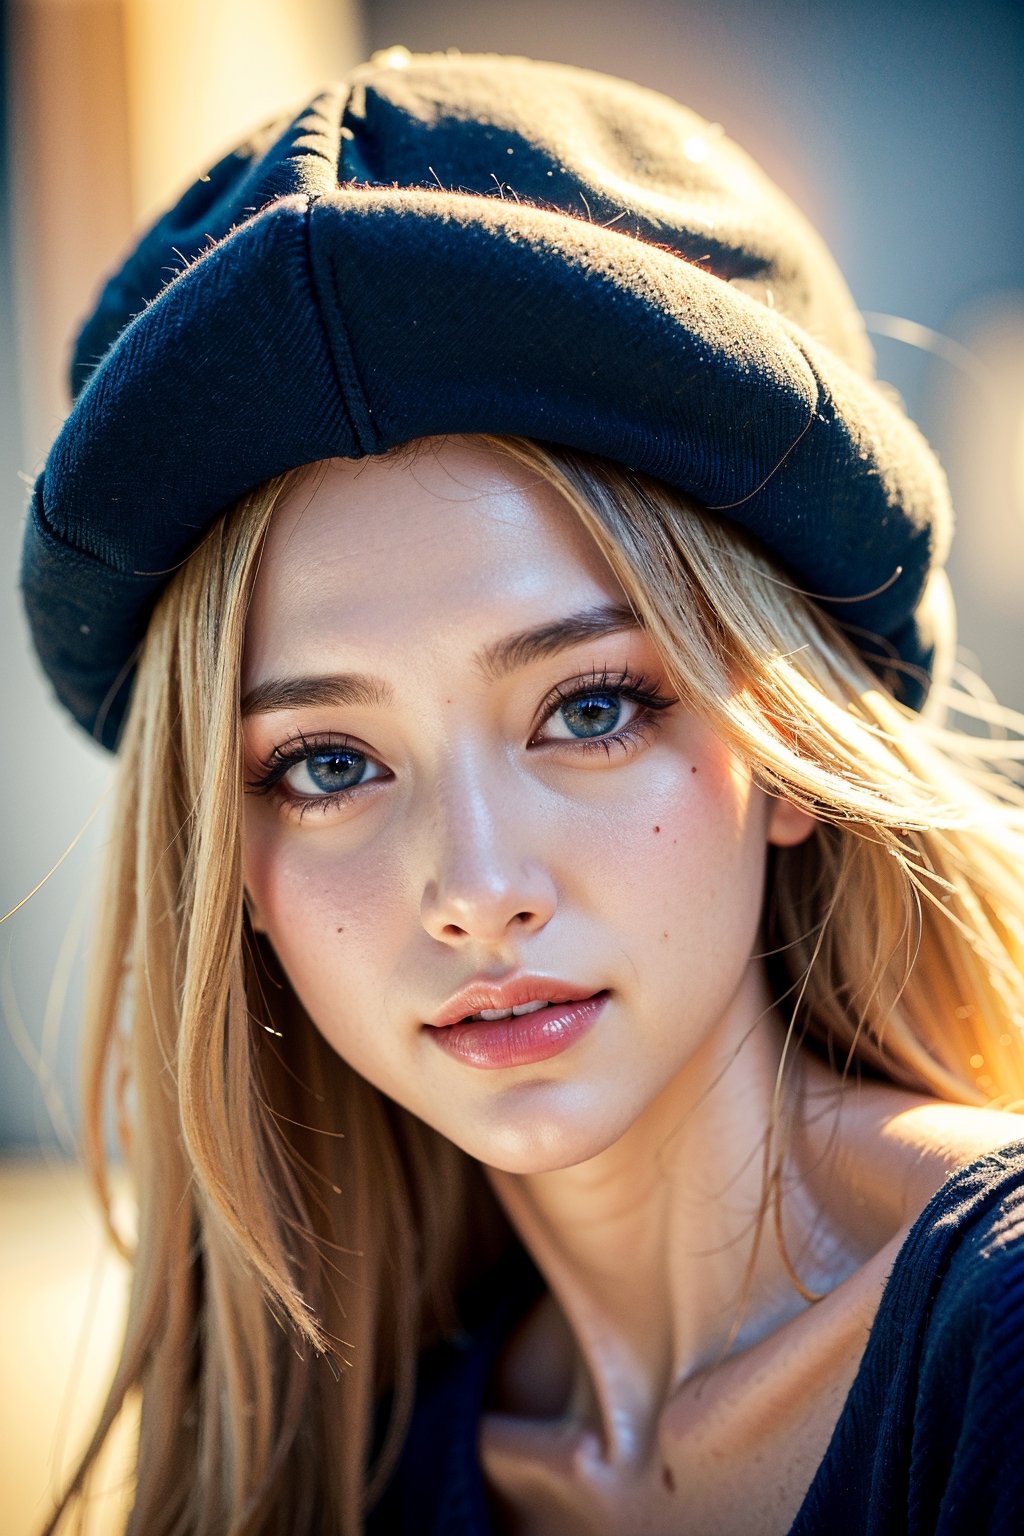 (best quality,4k,8k,highres,masterpiece:1.2),ultra-detailed,(realistic,photorealistic,photo-realistic:1.37),portraits,beautiful detailed eyes,beautiful detailed lips,extremely detailed eyes and face,longeyelashes,1girl,blonde hair,blue cap,blue shirt,smiling expression,natural light,soft shadows,fine texture,subtle colors,gentle background,subtle highlights and shadows,vibrant colors,feminine features,lively pose,serene atmosphere